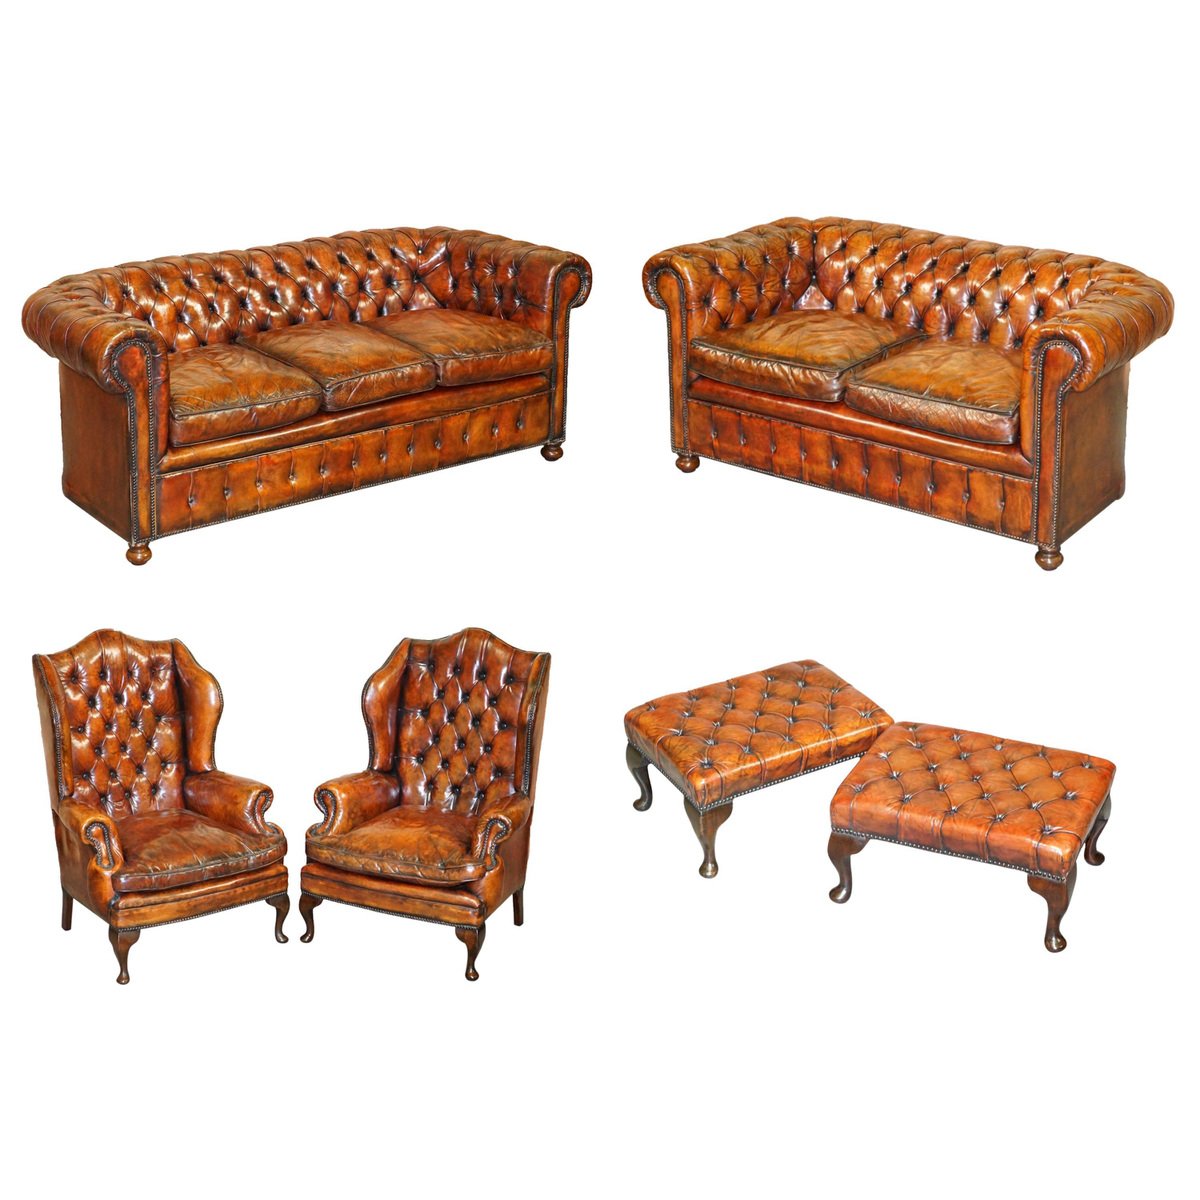 victorian brown leather chesterfield sofa armchairs stool suite set of 6 GZP-1006418